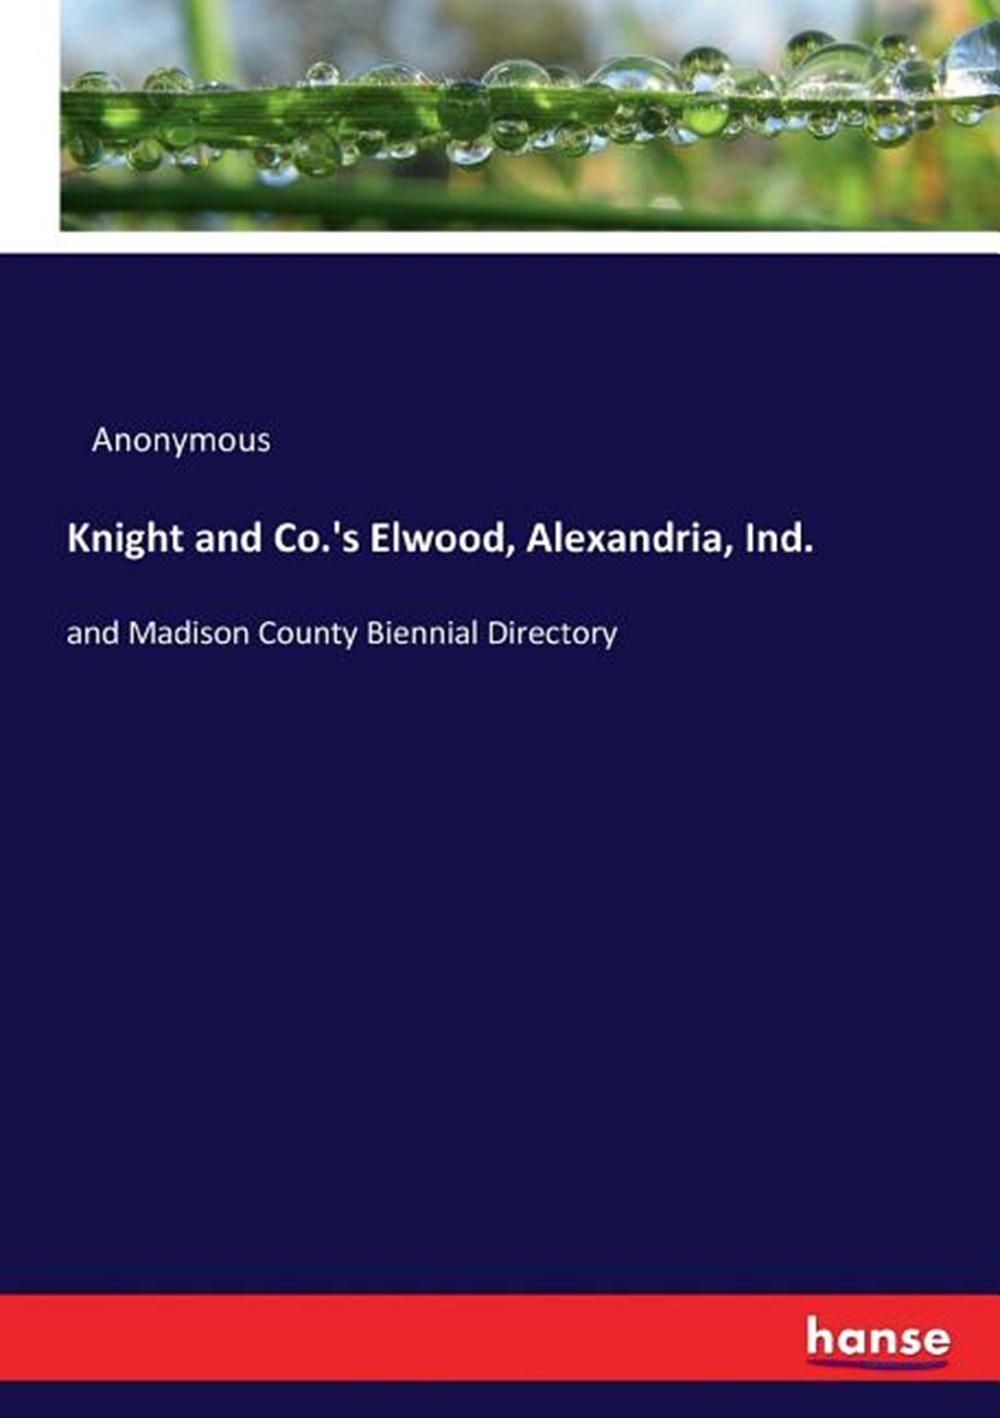 Knight and Co.'s Elwood, Alexandria, Ind.: and Madison County Biennial Directory